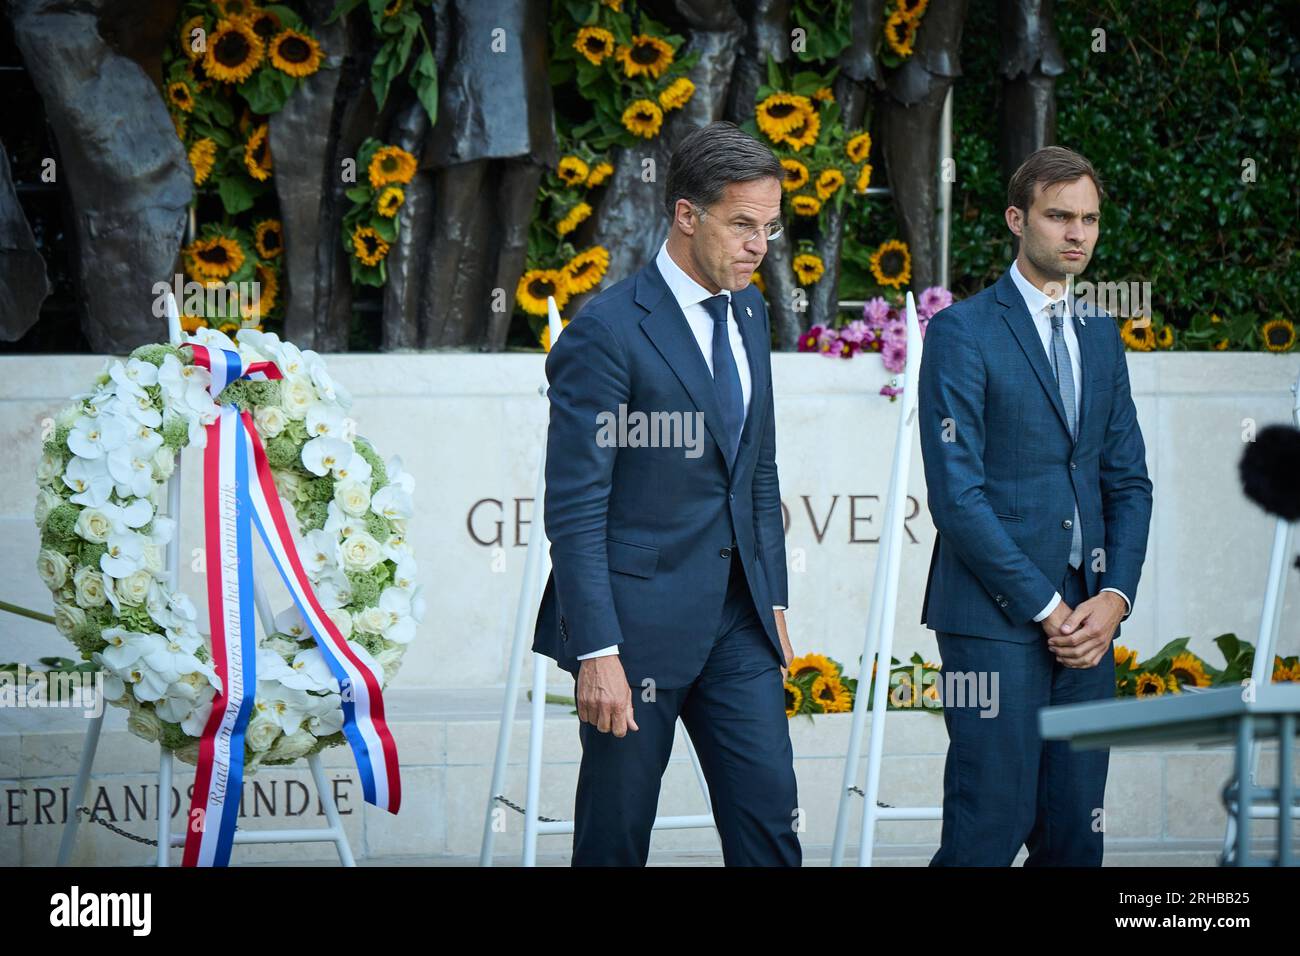 THE HAGUE - Outgoing Prime Minister Mark Rutte and Maarten van Ooijen, State Secretary for Youth and Prevention at the Indisch Monument during the National Commemoration of the capitulation of Japan on August 15, 1945. The Stichting Nationale Herdenking 15 Augustus 1945 annually organizes this commemoration in which all victims of the war against Japan and the Japanese occupation of the former Dutch East Indies are commemorated. ANP PHIL NIJHUIS netherlands out - belgium out Stock Photo